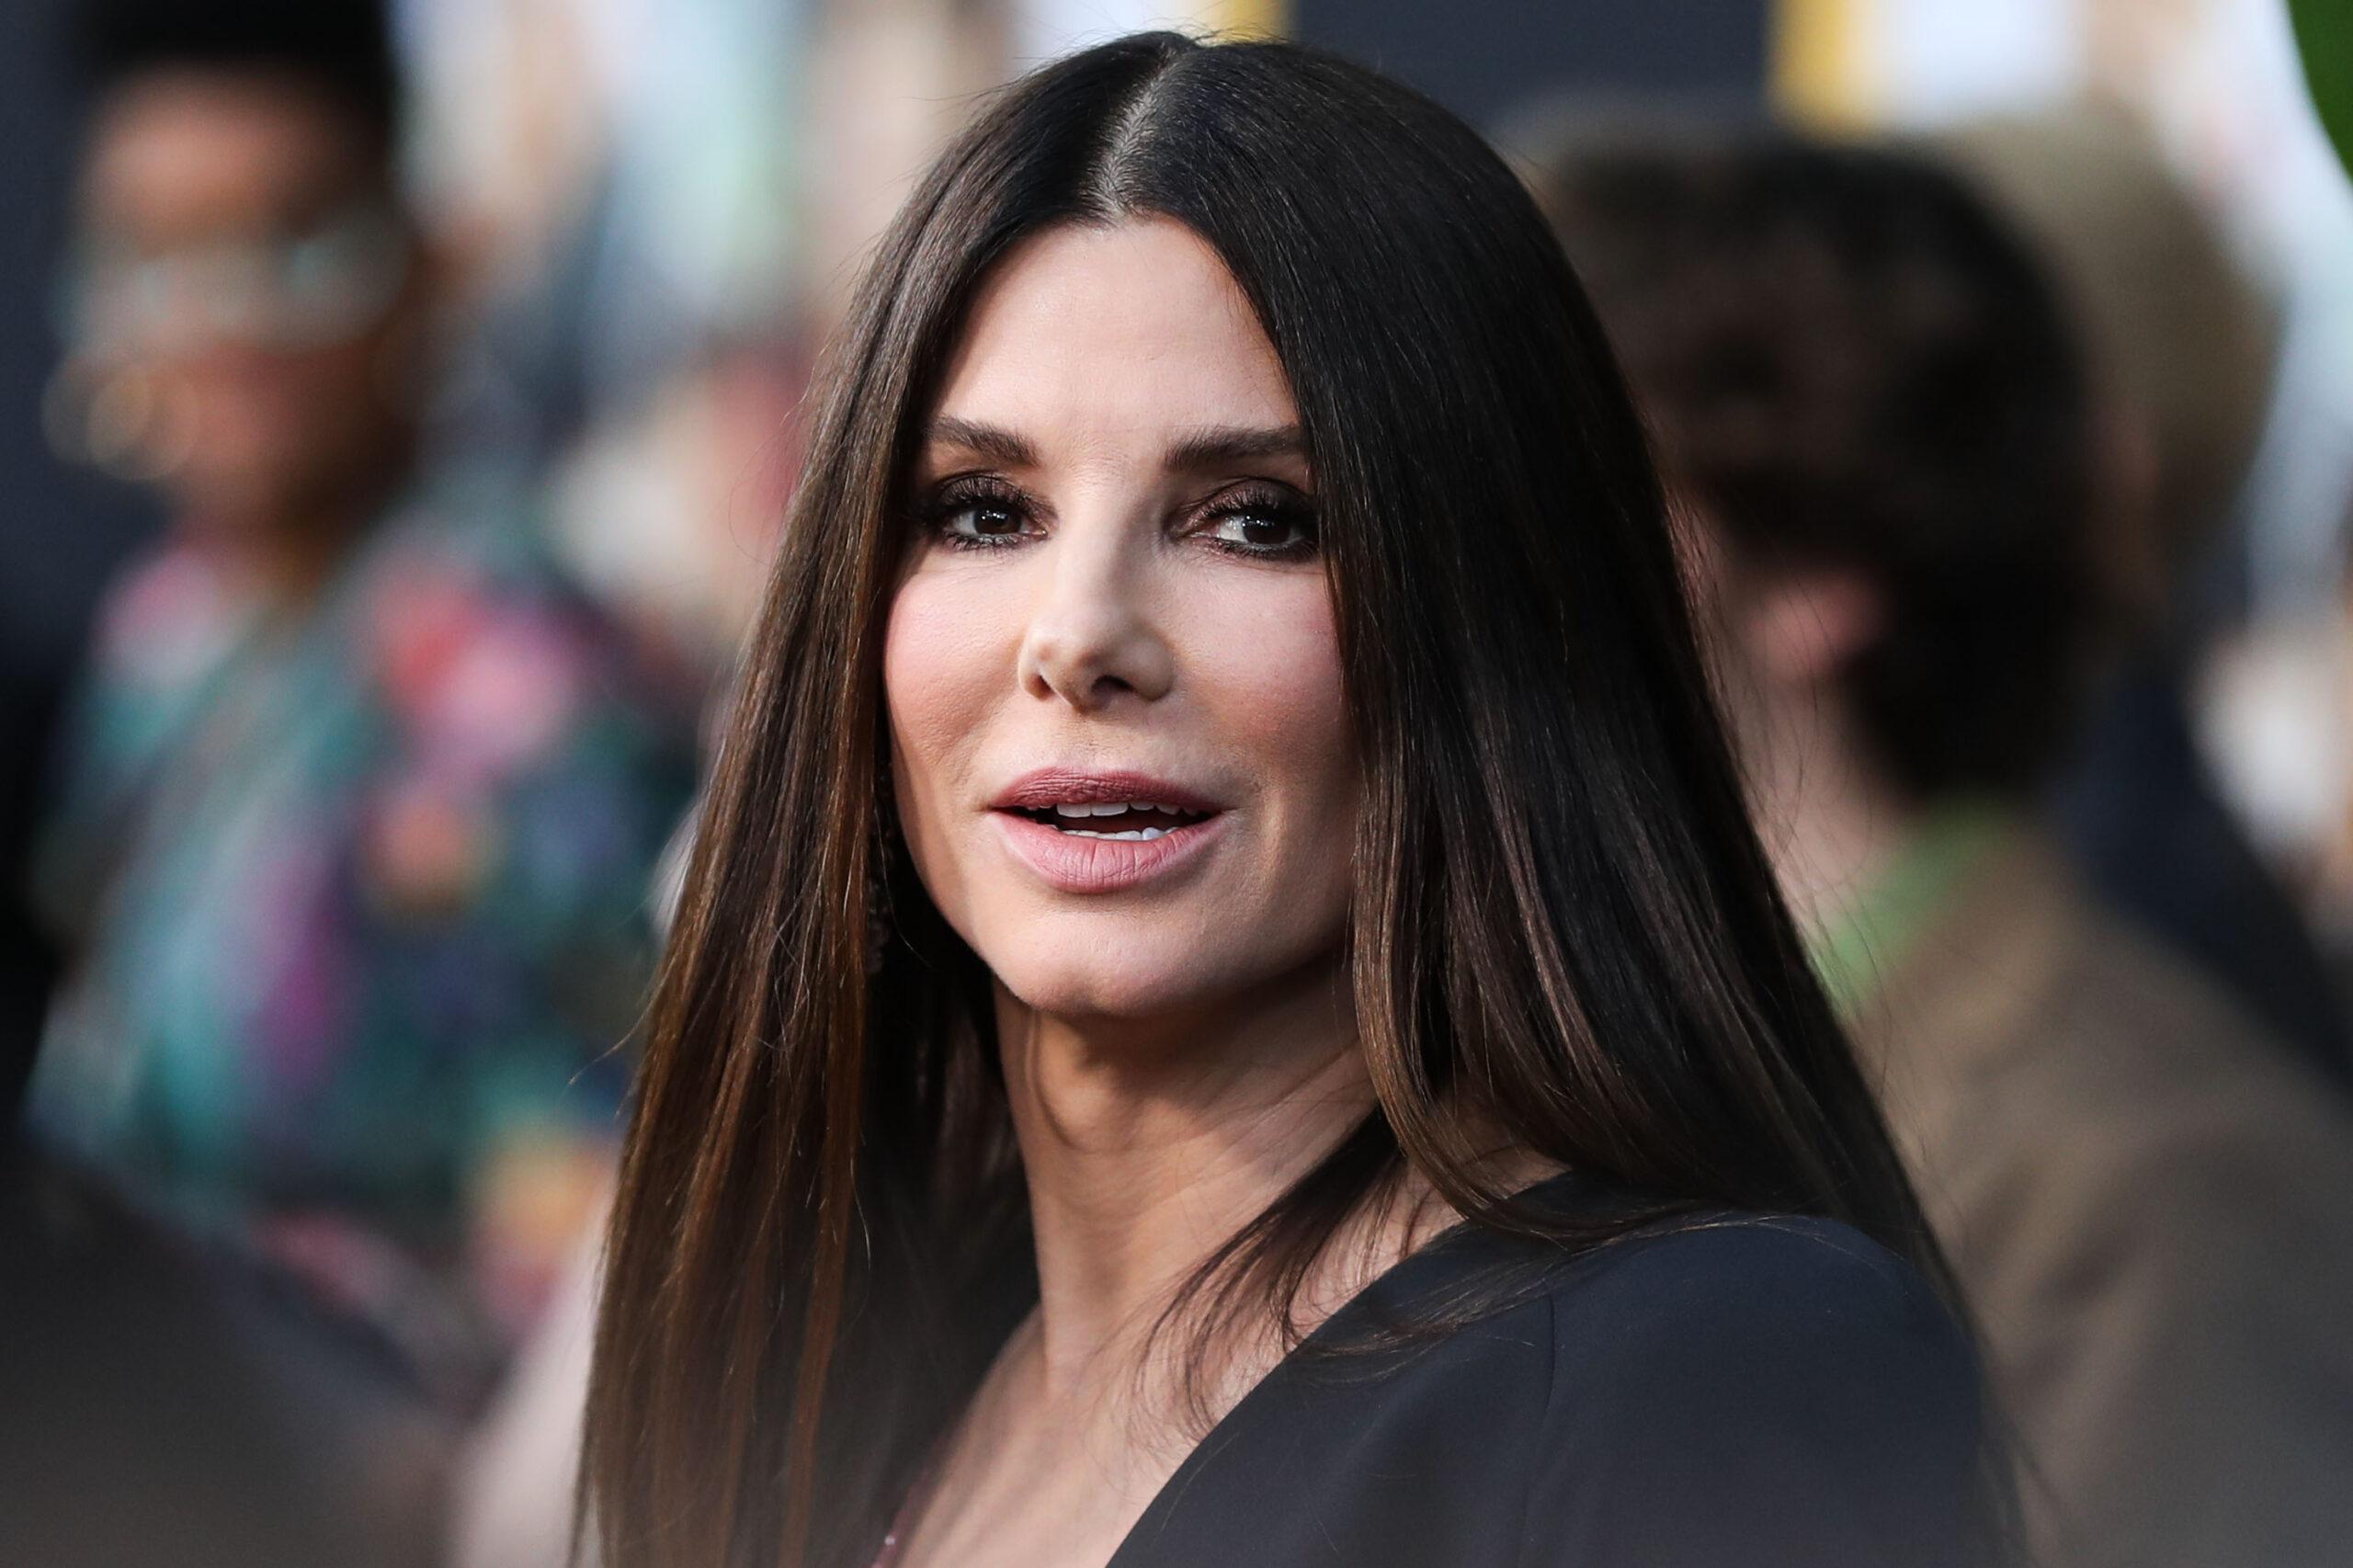 Sandra Bullock being pulled into Michael Oher vs. the Tuohys controversy